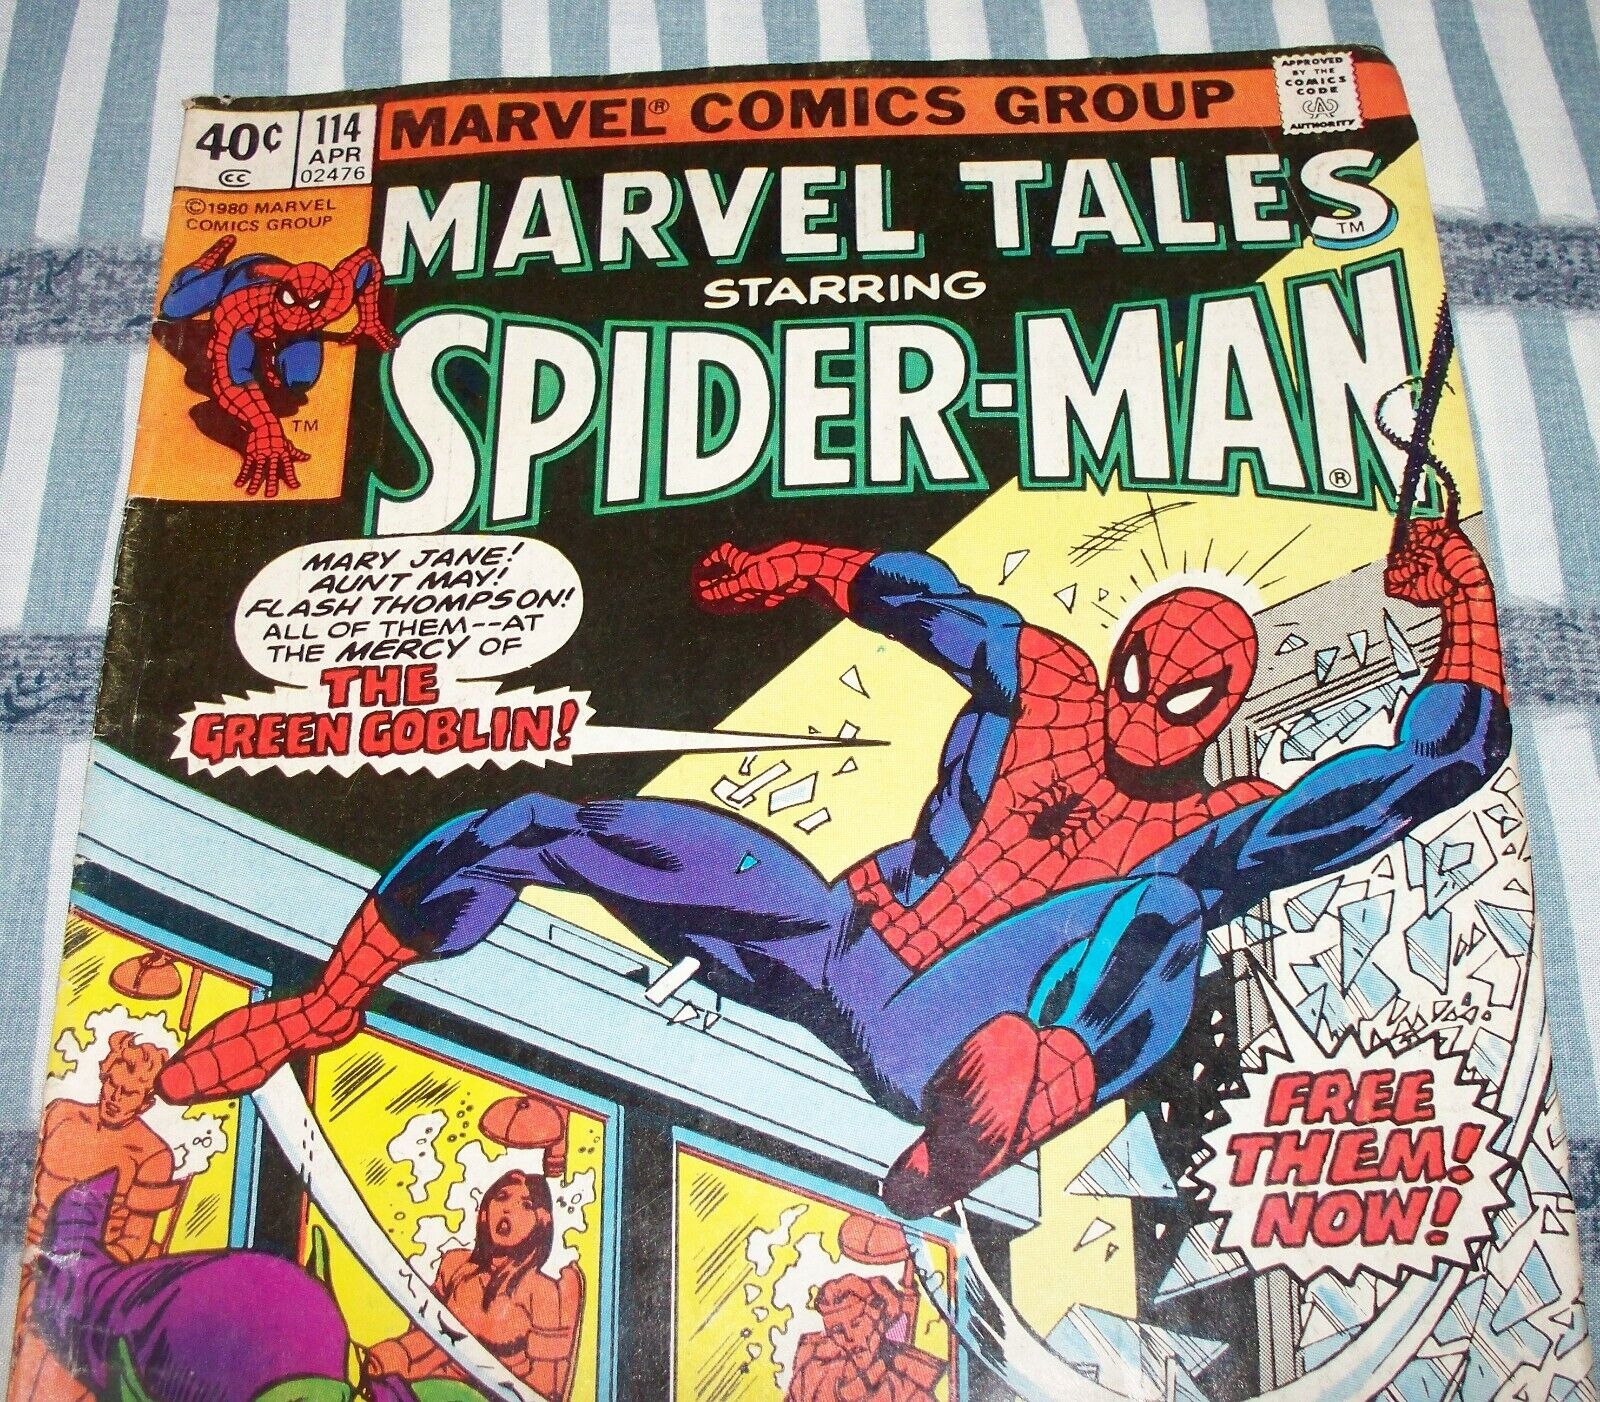 Marvel Tales #114 Amazing Spider-Man #137 Reprint from Apr 1980 in VG+  Condition